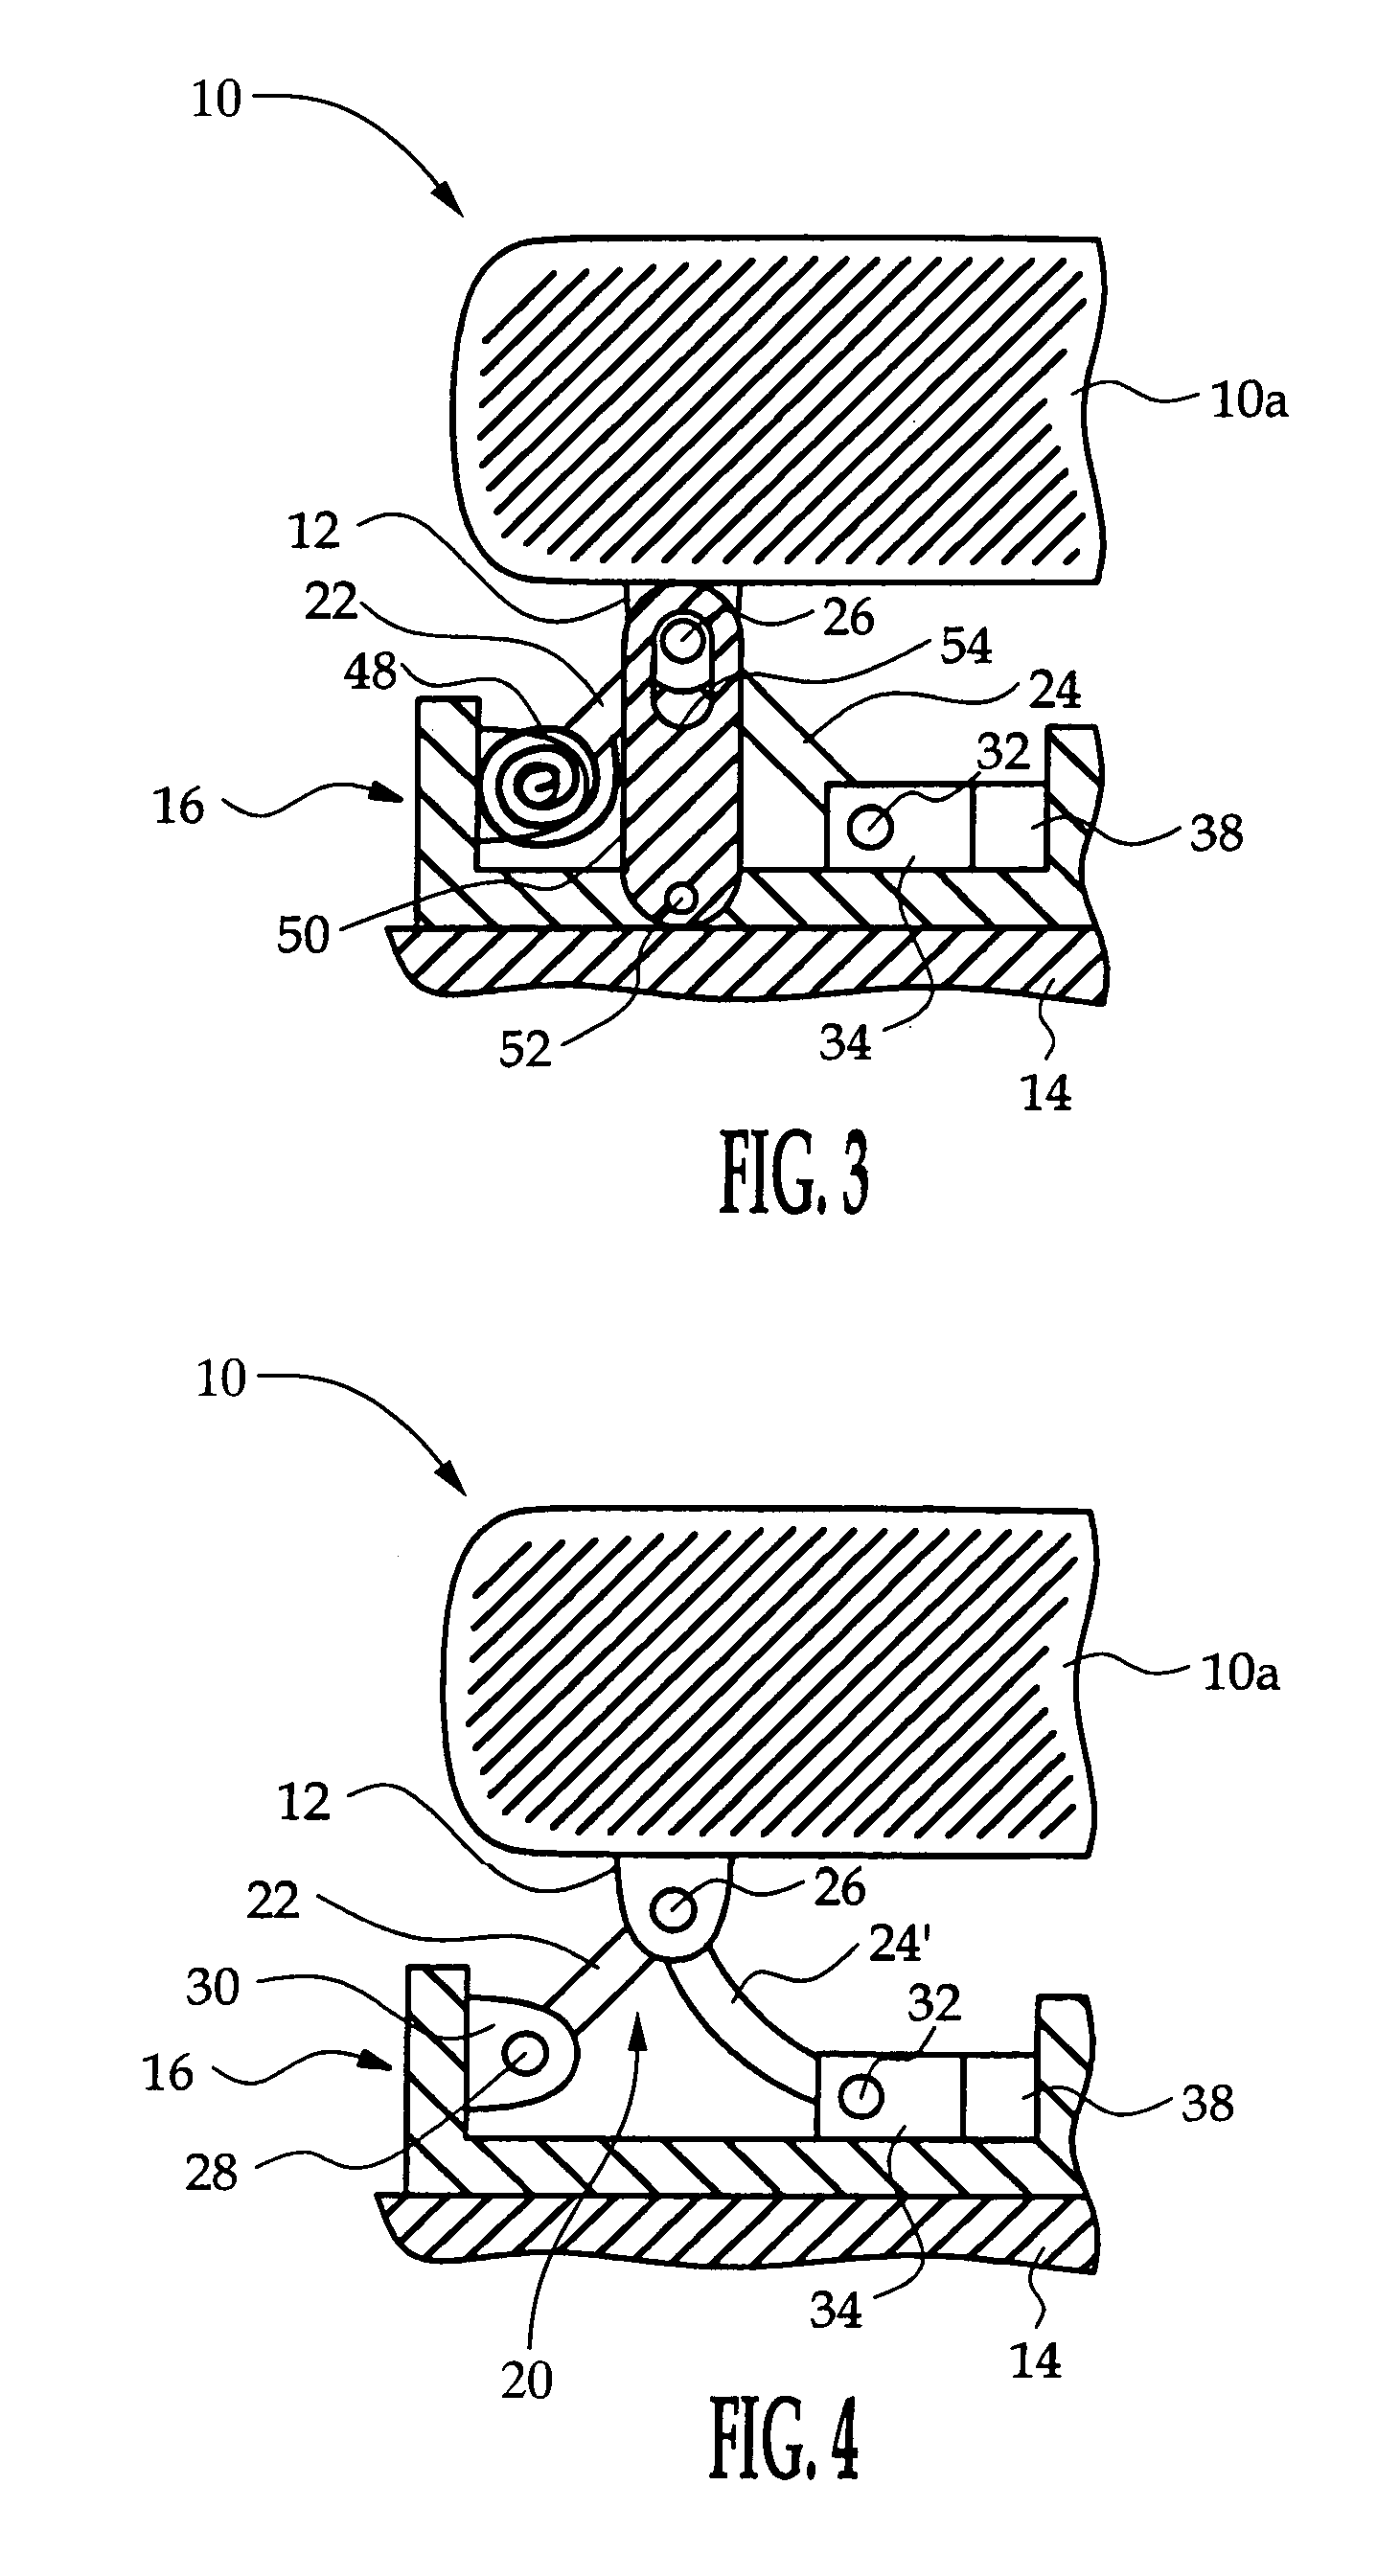 Frame-based occupant weight estimation apparatus having compliant linkage assembly